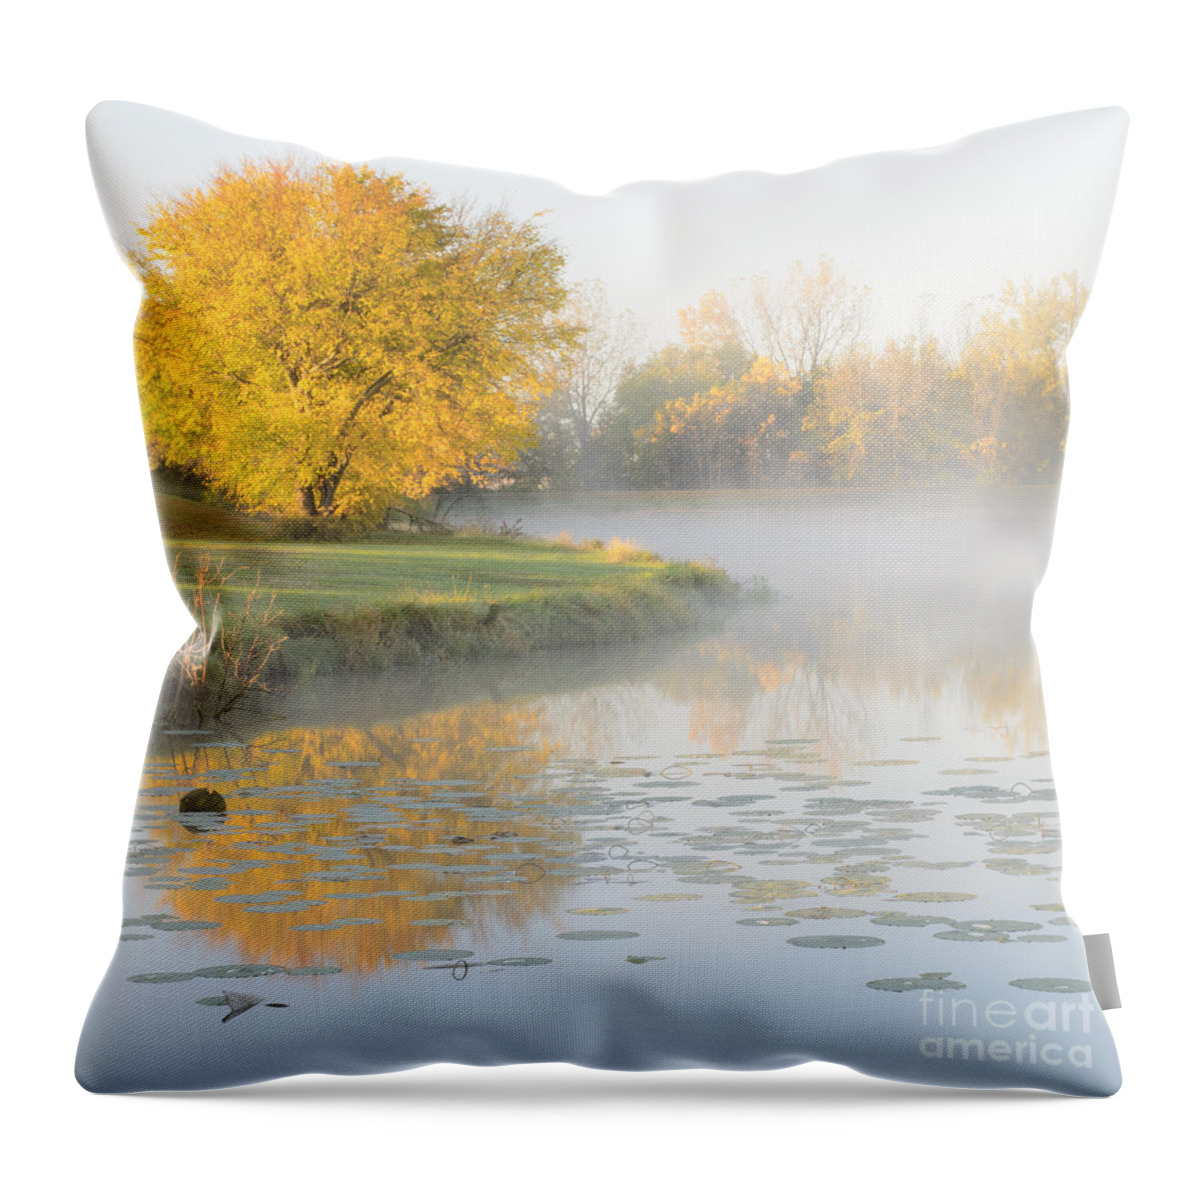 A Vibrant Yellow Tree During The Morning Golden Hour At The Lake. A Very Brisk Morning With Steam Rising Off The Lake. Throw Pillow featuring the photograph Yellow Tree Reflection on the Lake by Tamara Becker